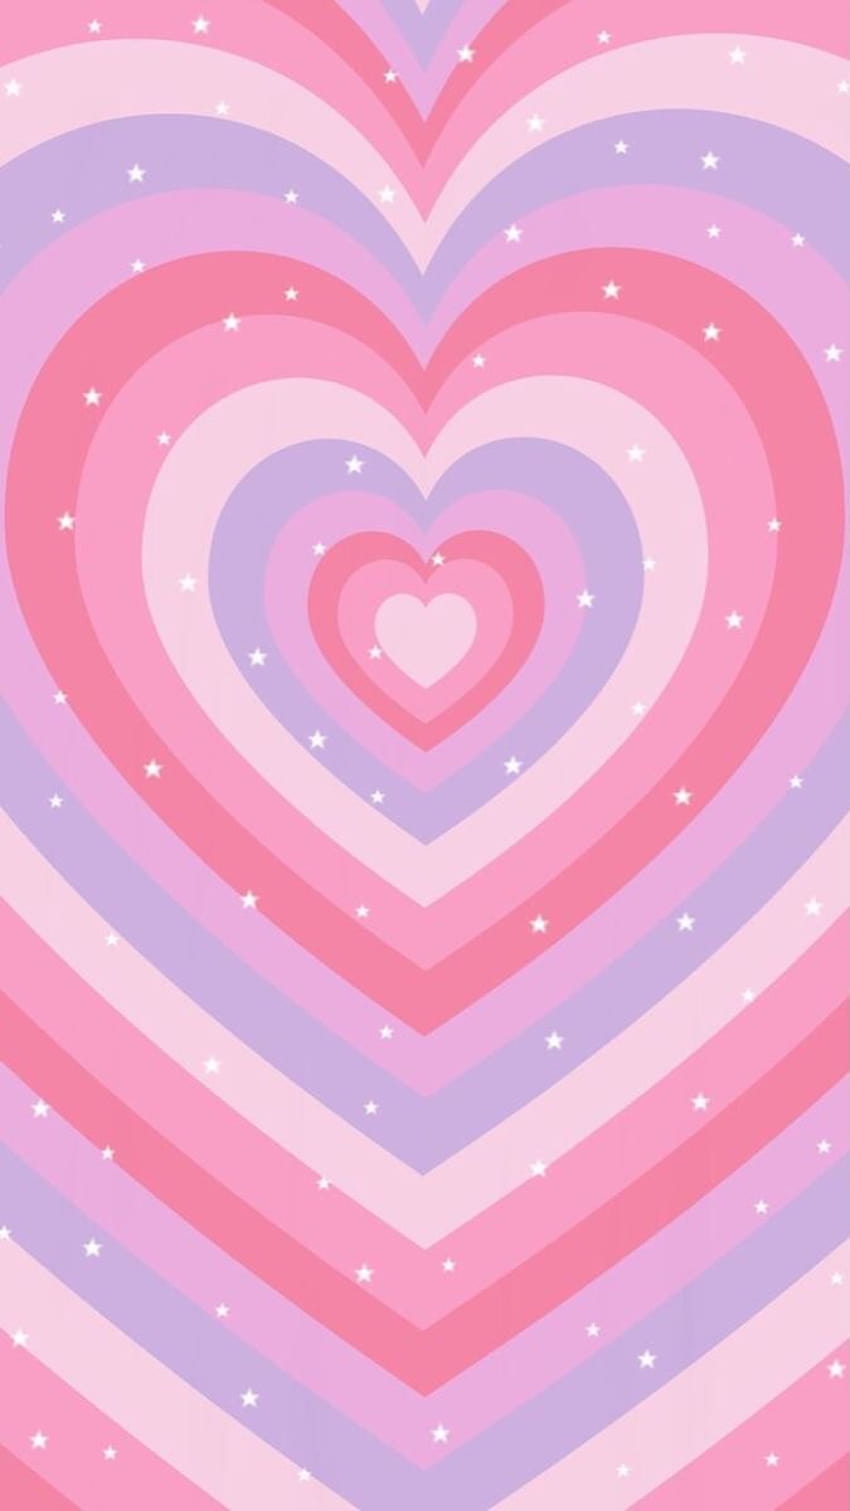 346 about, aesthetic pink hearts HD phone wallpaper